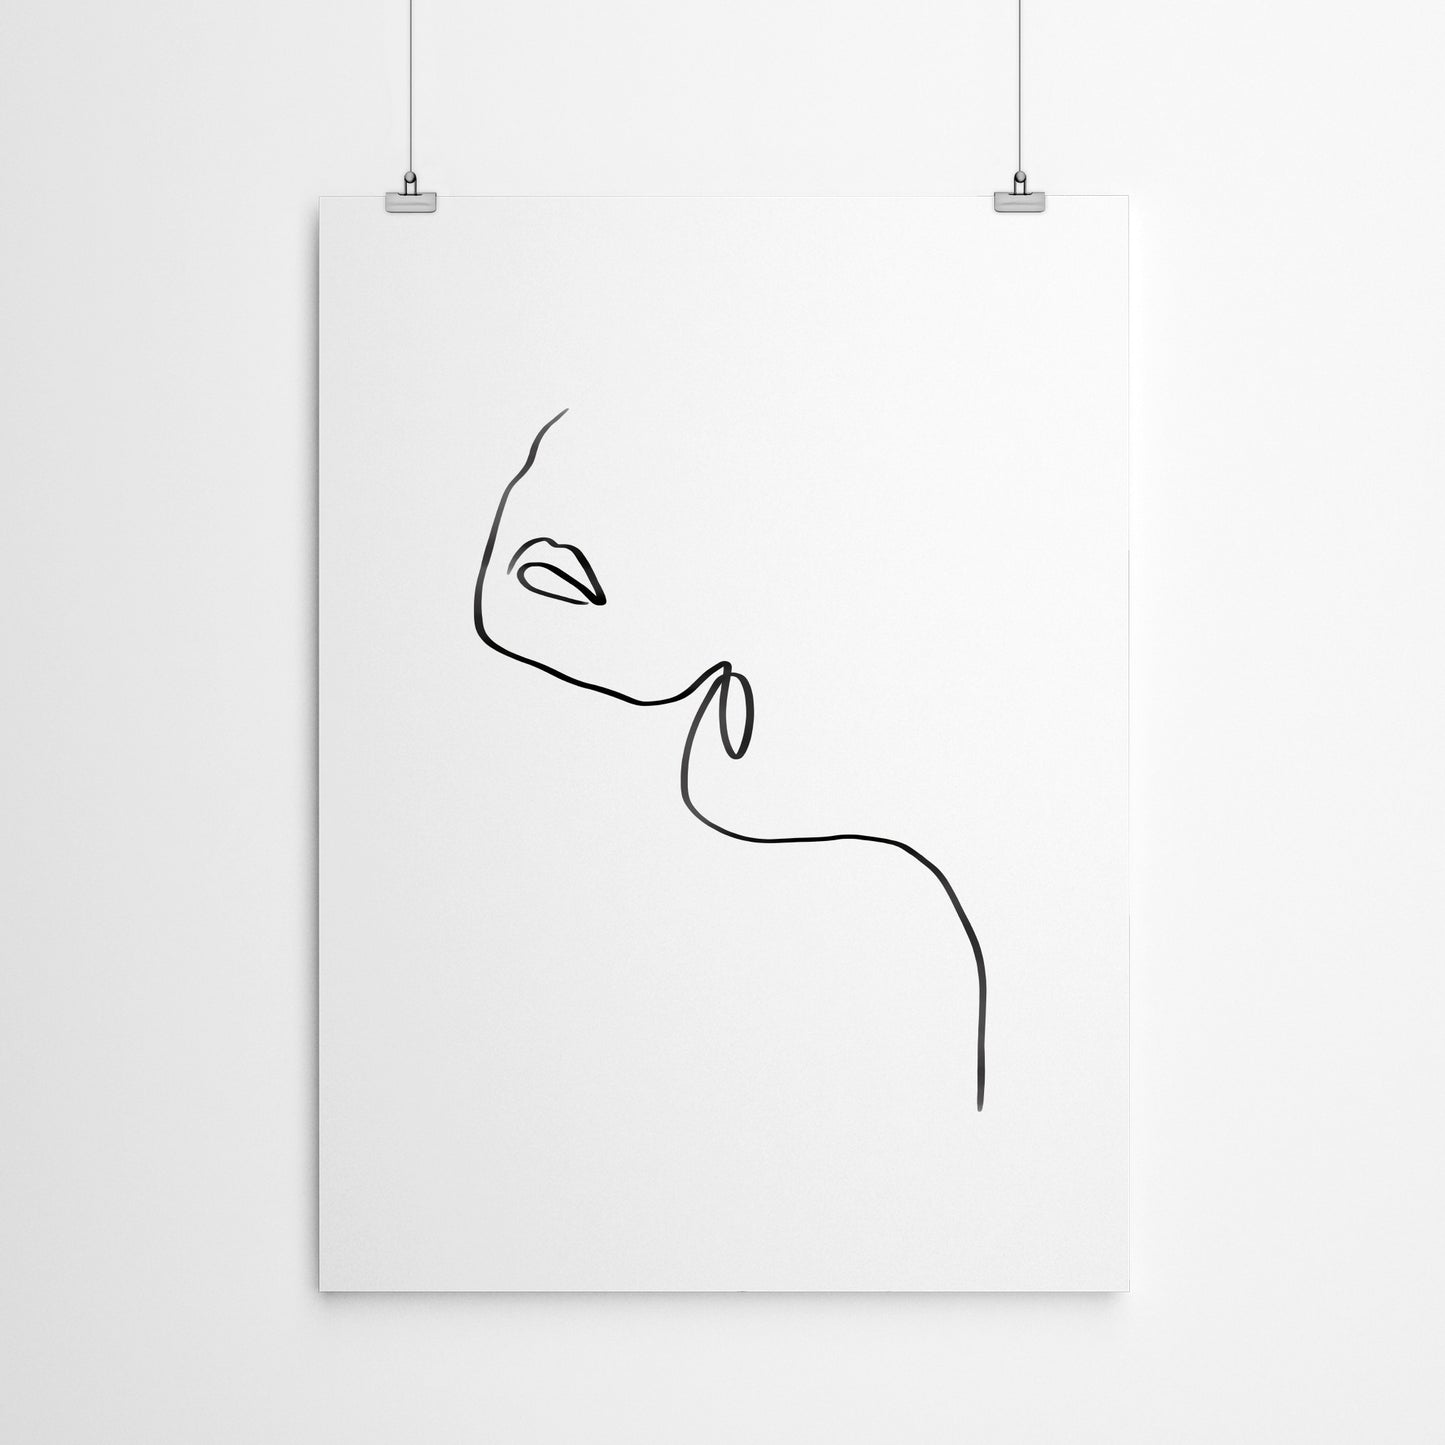 Woman Line Art 001 by Thomas Succes - Canvas, Poster or Framed Print